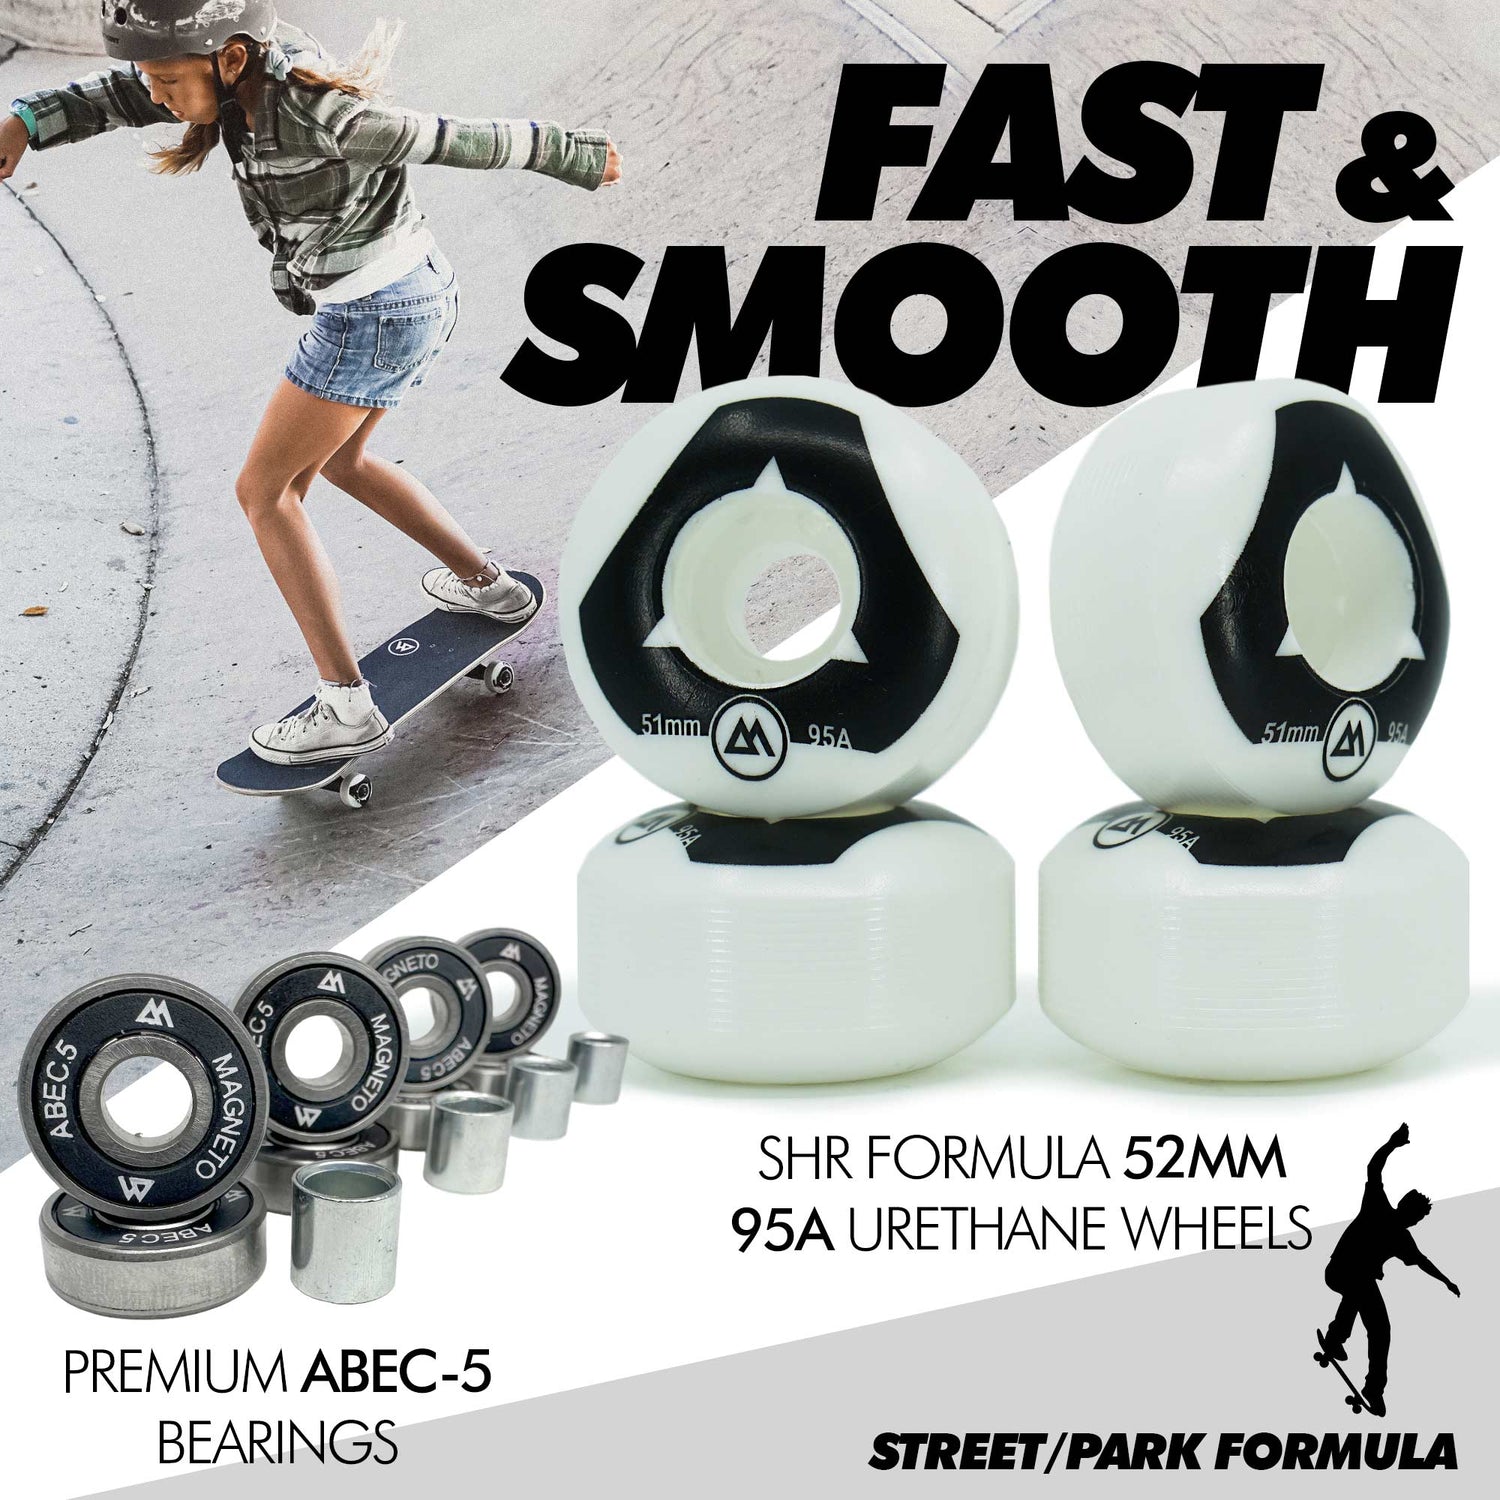 smooth and fast boards